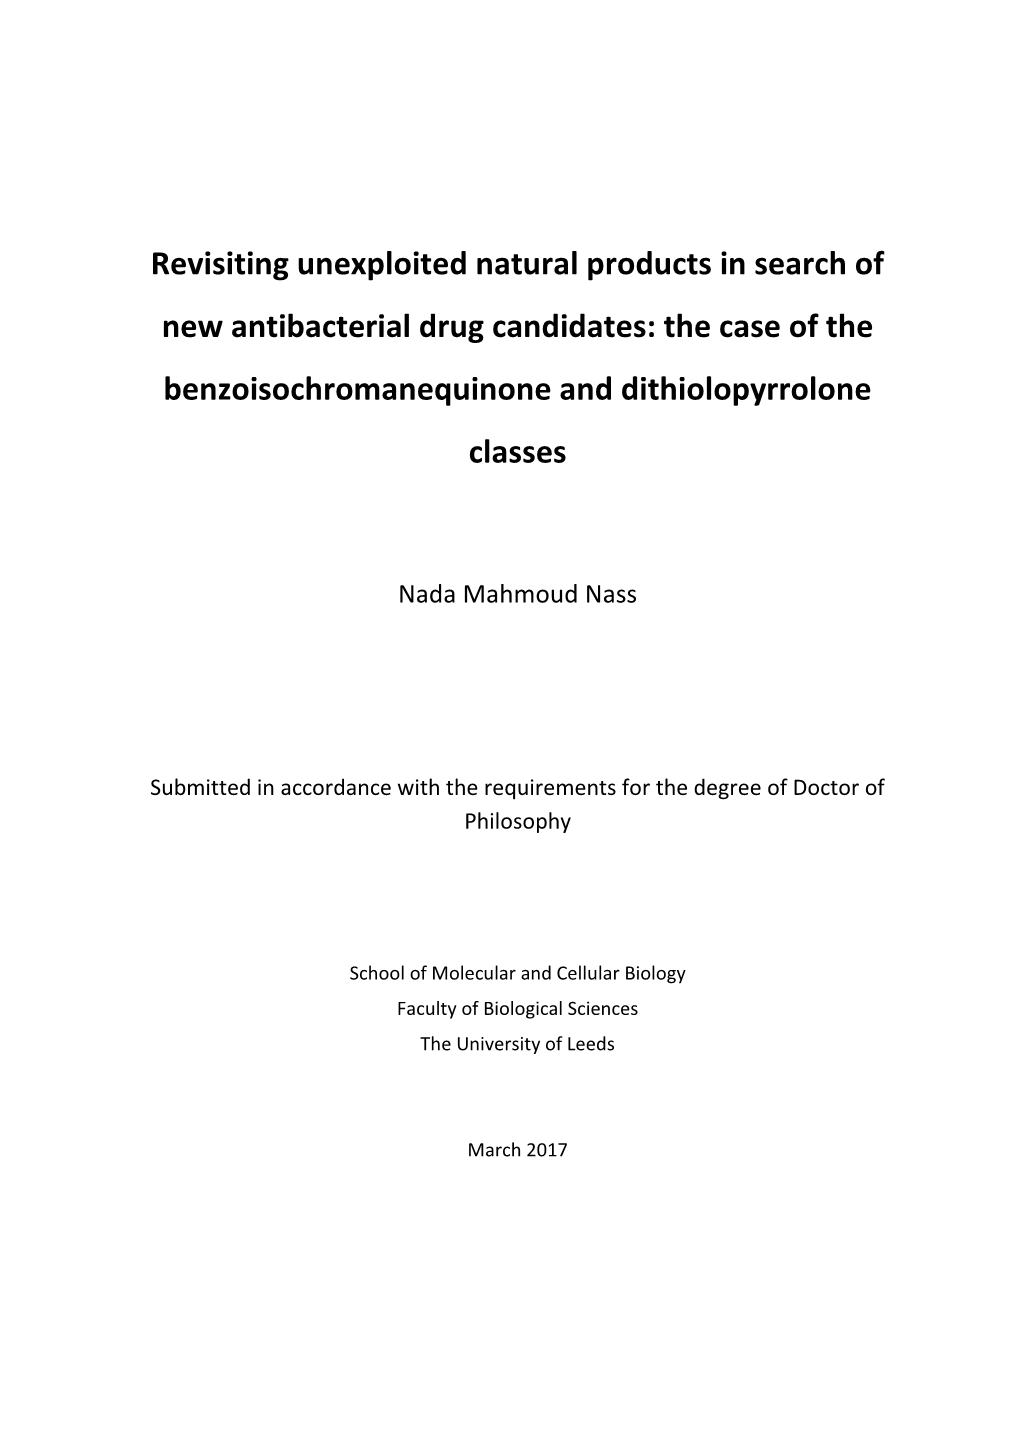 Revisiting Unexploited Natural Products in Search of New Antibacterial Drug Candidates: the Case of the Benzoisochromanequinone and Dithiolopyrrolone Classes